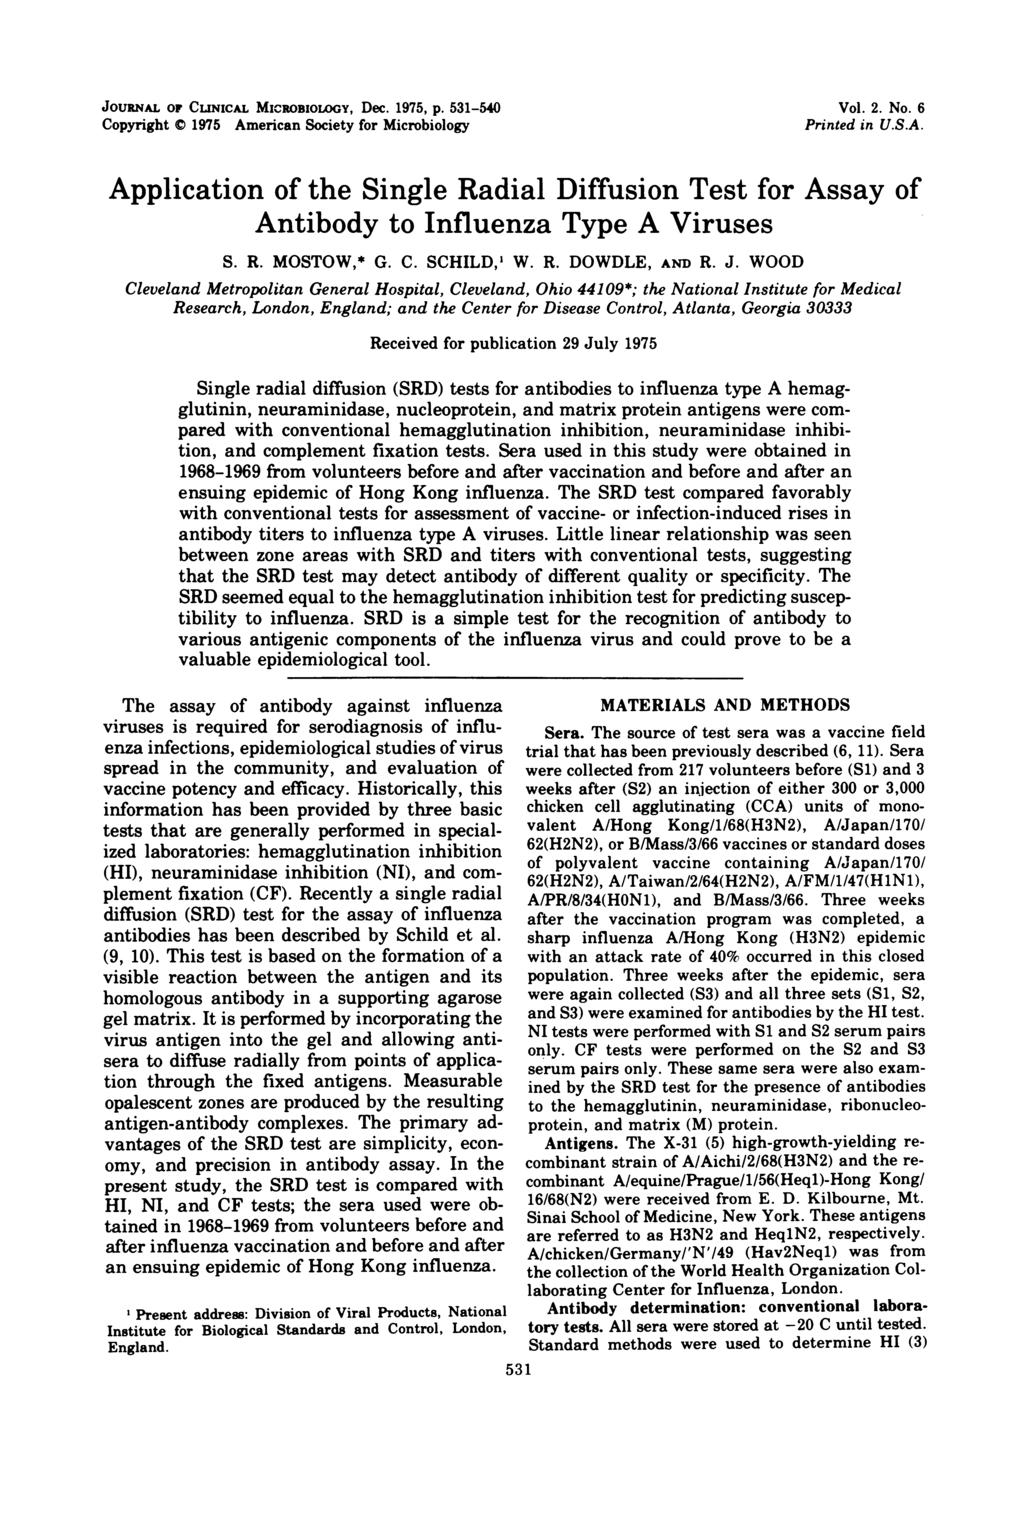 JOURNAL OF CUNICAL MICROBIOLOGY, Dec. 1975, p. 531-540 Copyright 1975 American Society for Microbiology Vol. 2. No. 6 Printed in U.S.A. Application of the Single Radial Diffusion Test for Assay of Antibody to Influenza Type A Viruses S.